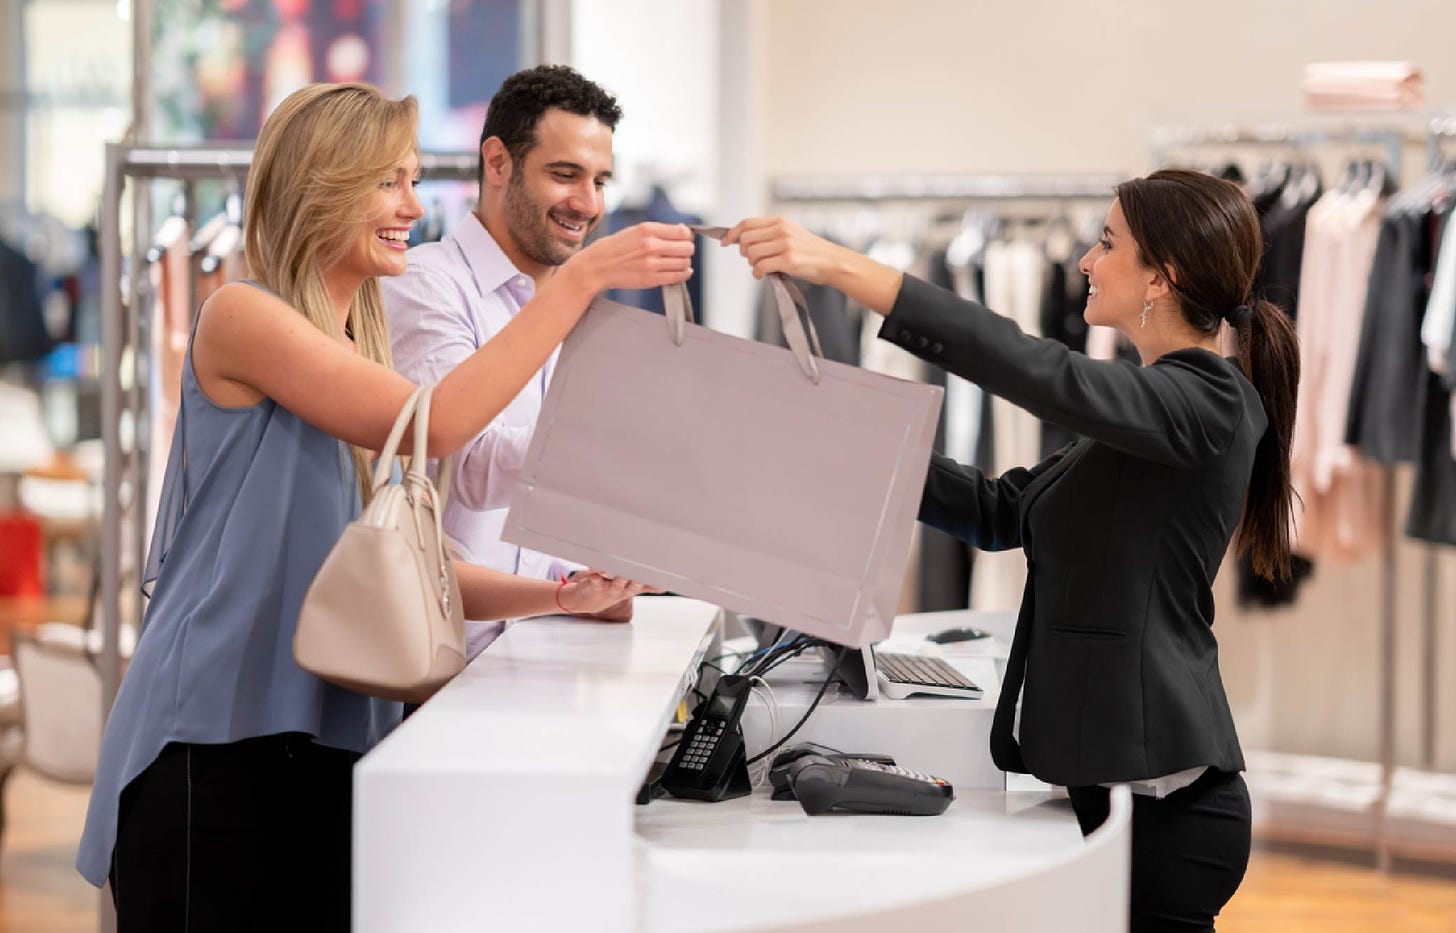 How to Impress Customers With These Useful Retail Customer Service Tips |  PointofSale.com :